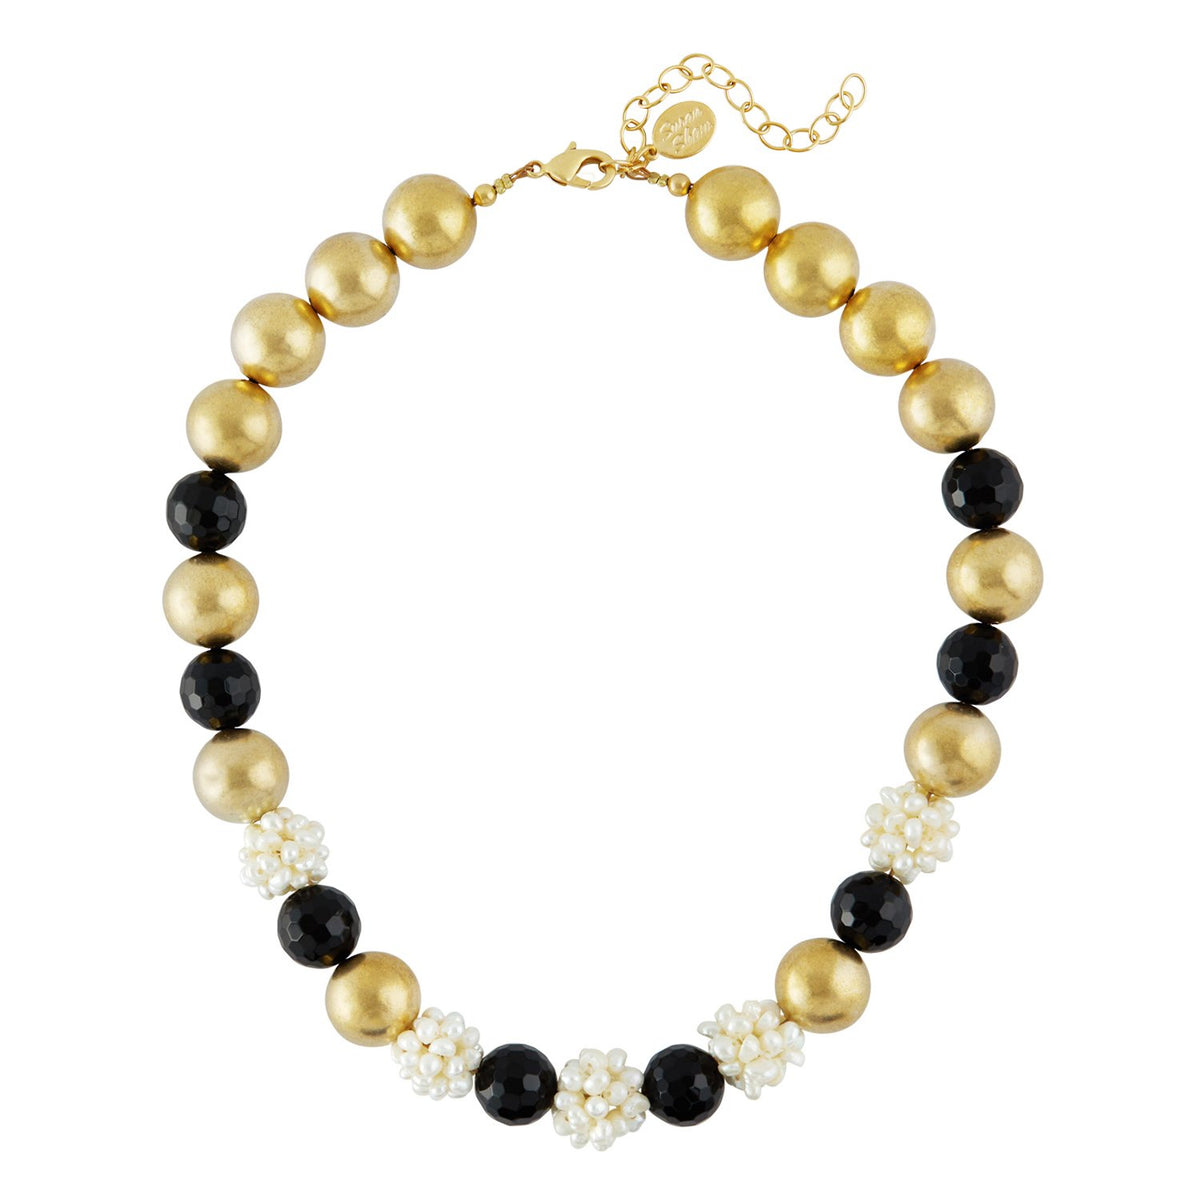 14K Black Onyx and Freshwater Pearl Necklace with Mother of Pearl Enhancer  | eBay